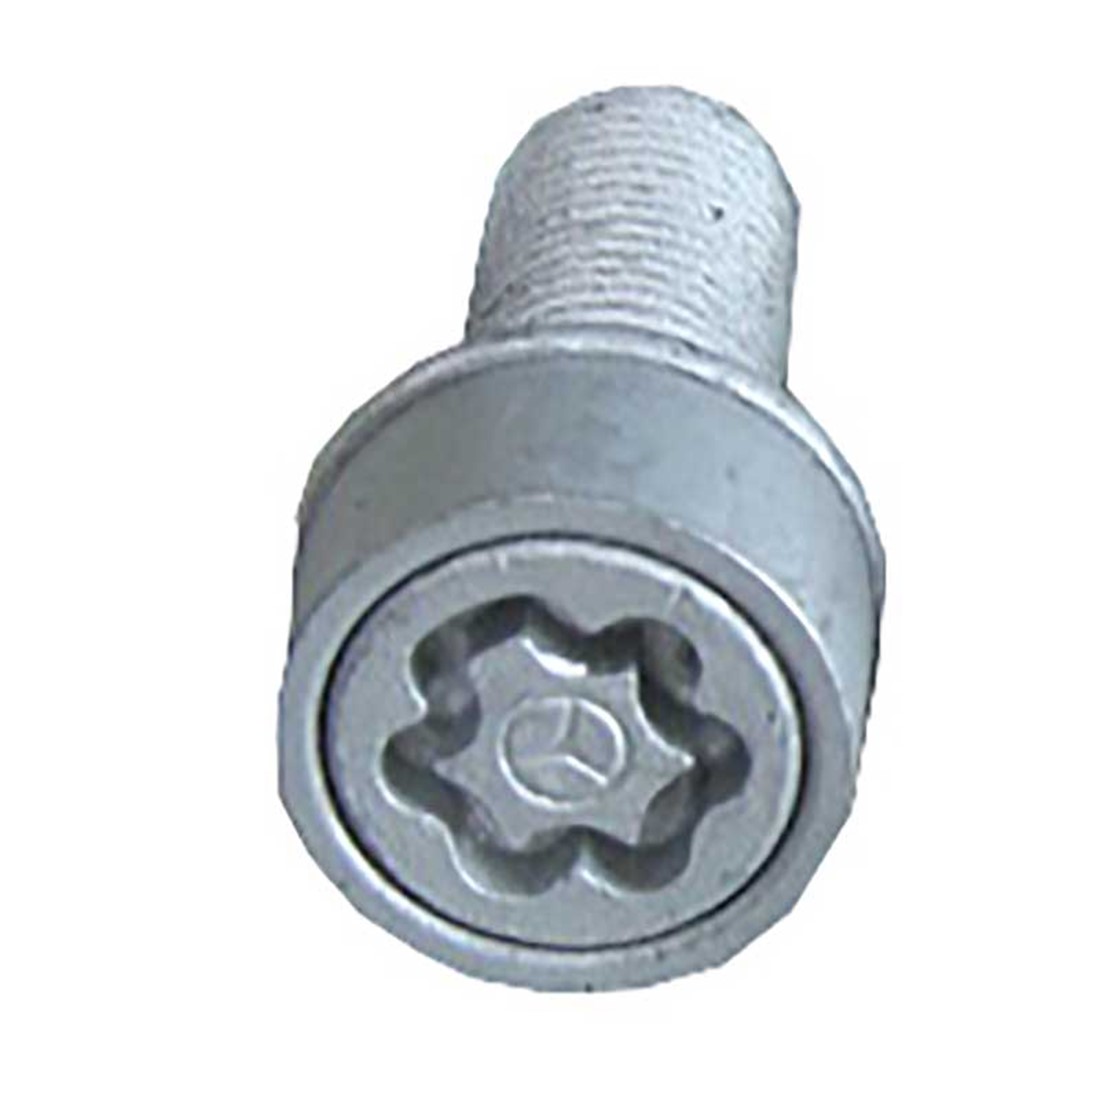 JTC6747 wheel lock socket imported car for lock bolt remove Manufacturers direct delivery 